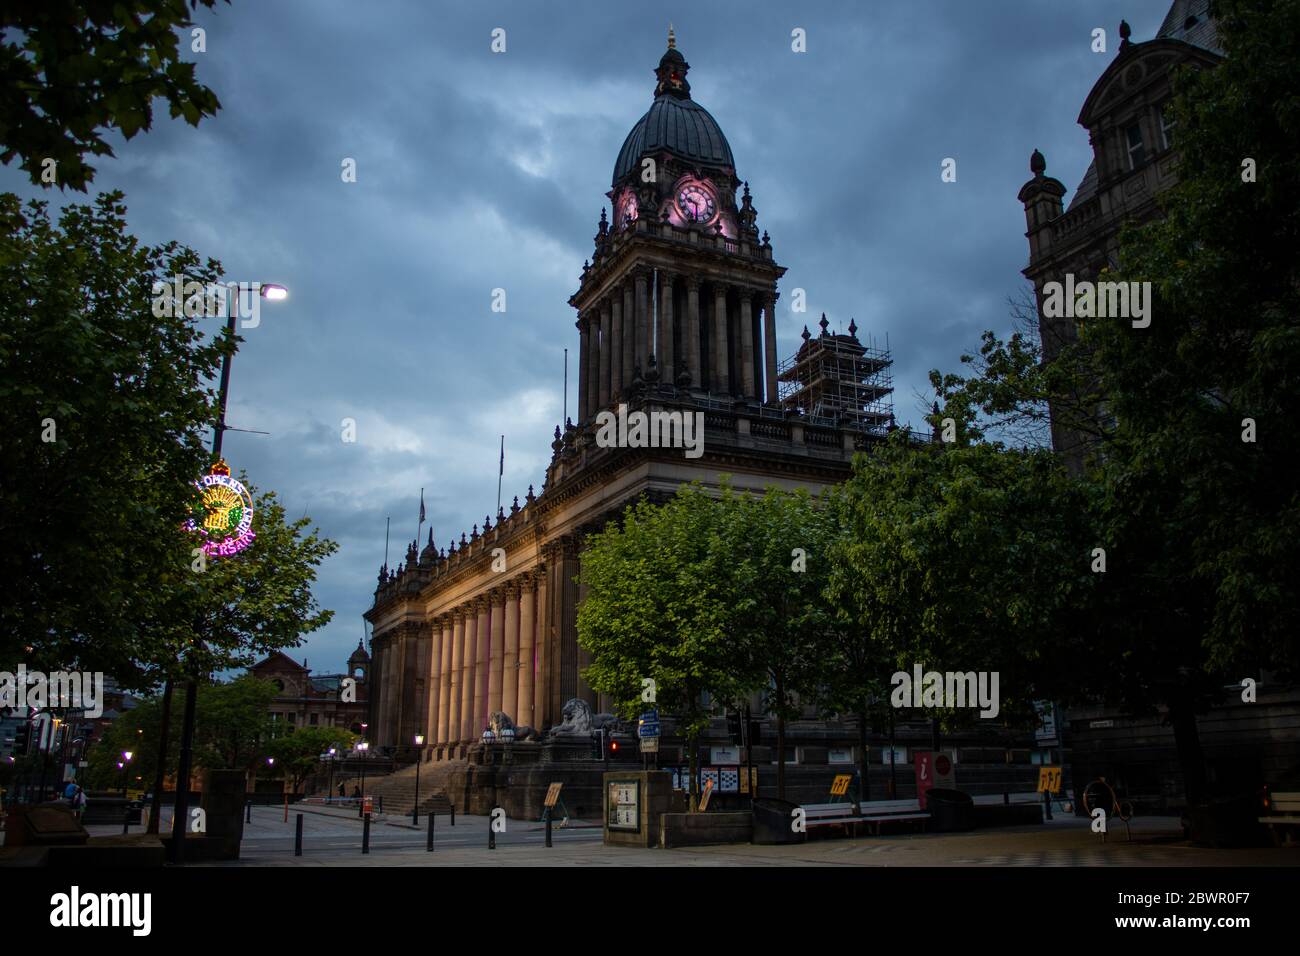 Leeds UK, 2nd June 2020: Night time photo of the Leeds Town Hall on a cloudy night, in the Leeds City Centre in West Yorkshire in the UK in the evenin Stock Photo